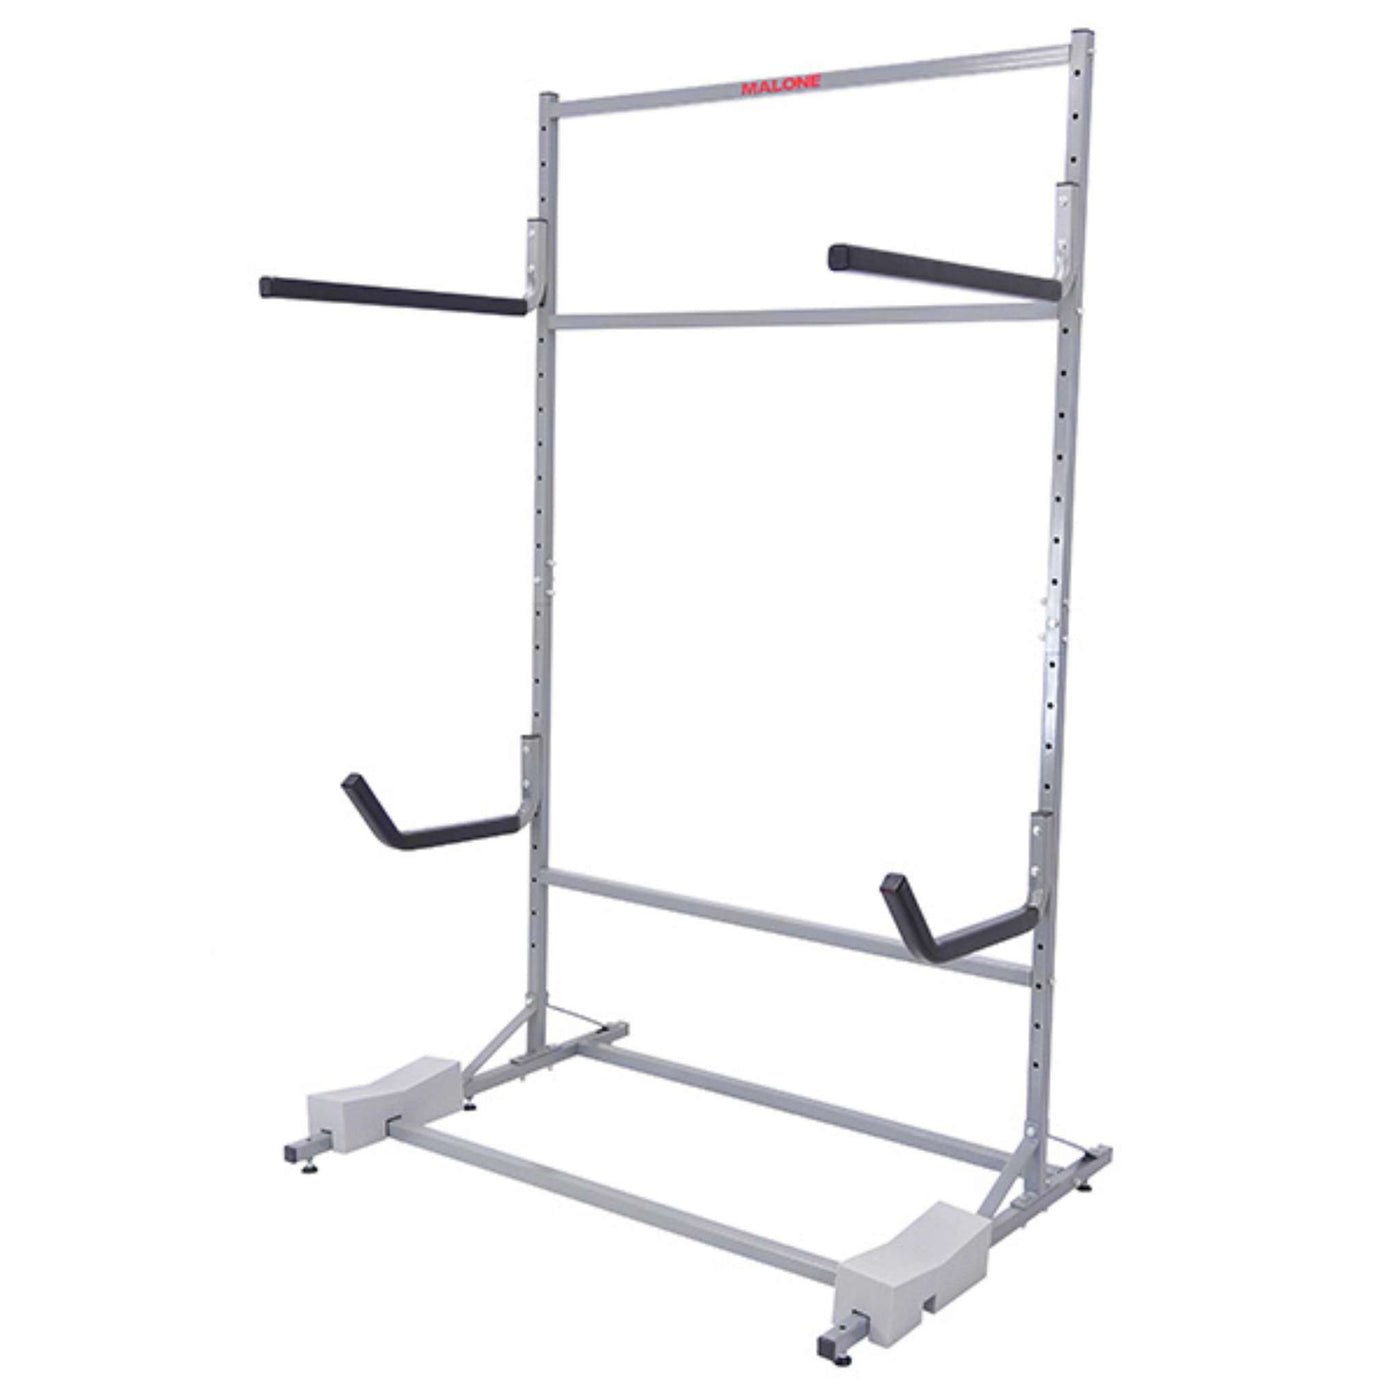 Malone Free Standing Rack - 2 Kayak & 2+ SUP Storage | Kayak and Canoe Storage Systems NZ | Further Faster Christchurch NZ 